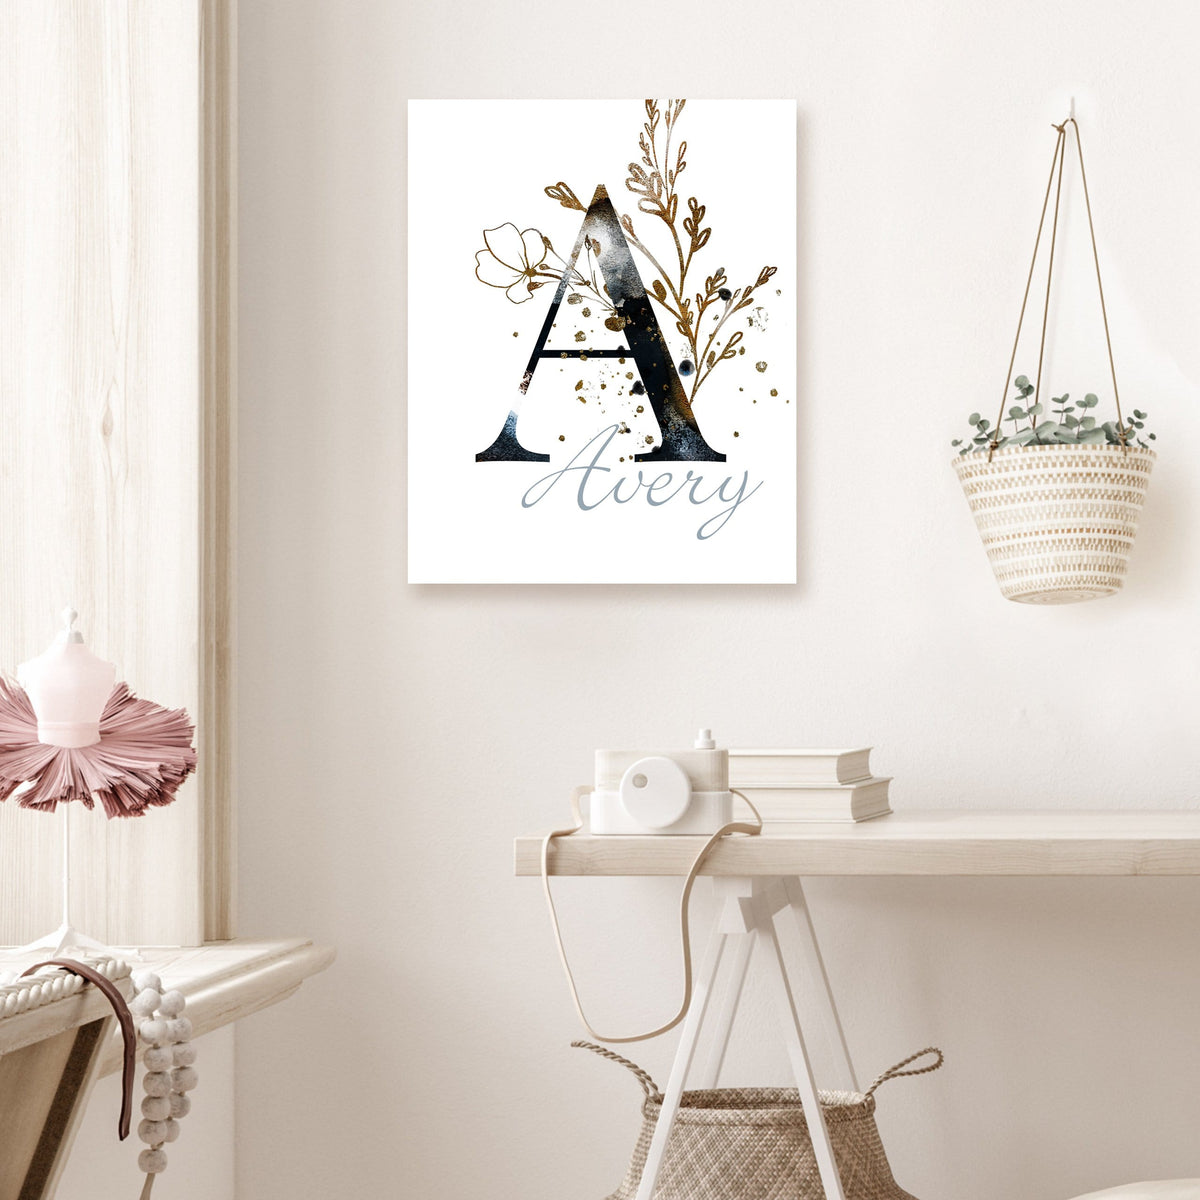 elegant personalized gifts for her from personal prints